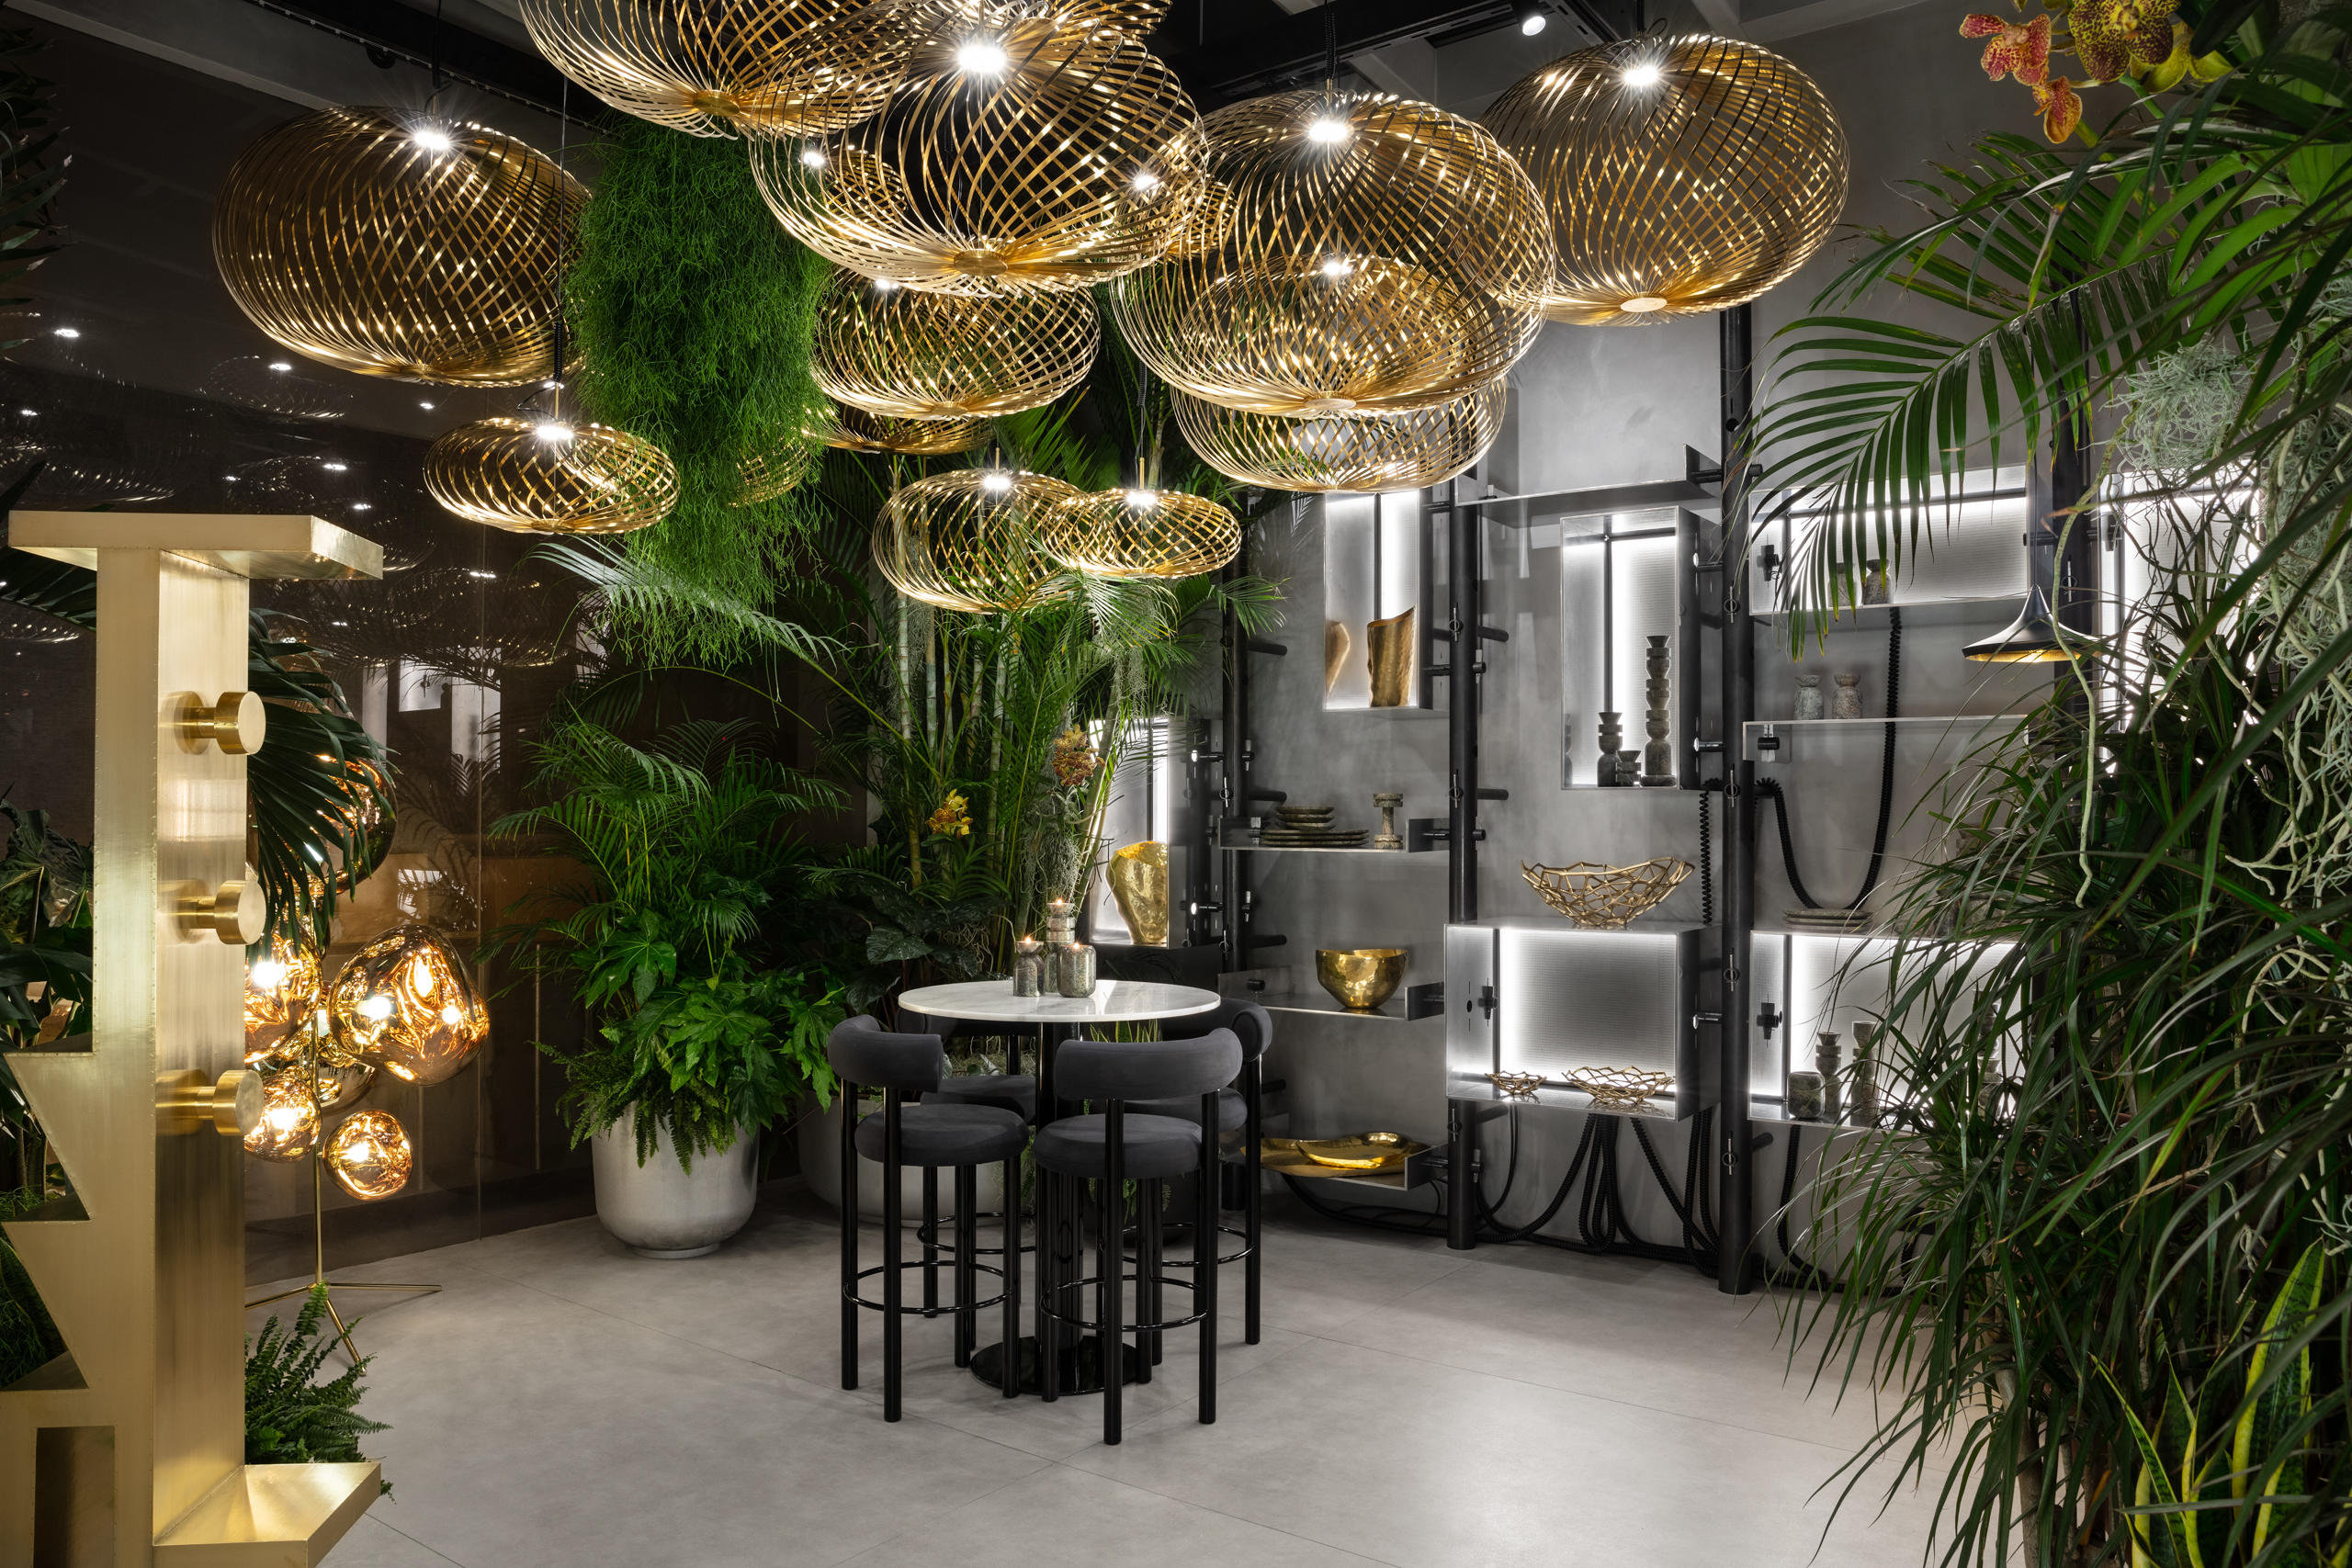 Claudia Baillie reflects on Milan Design Week 2019